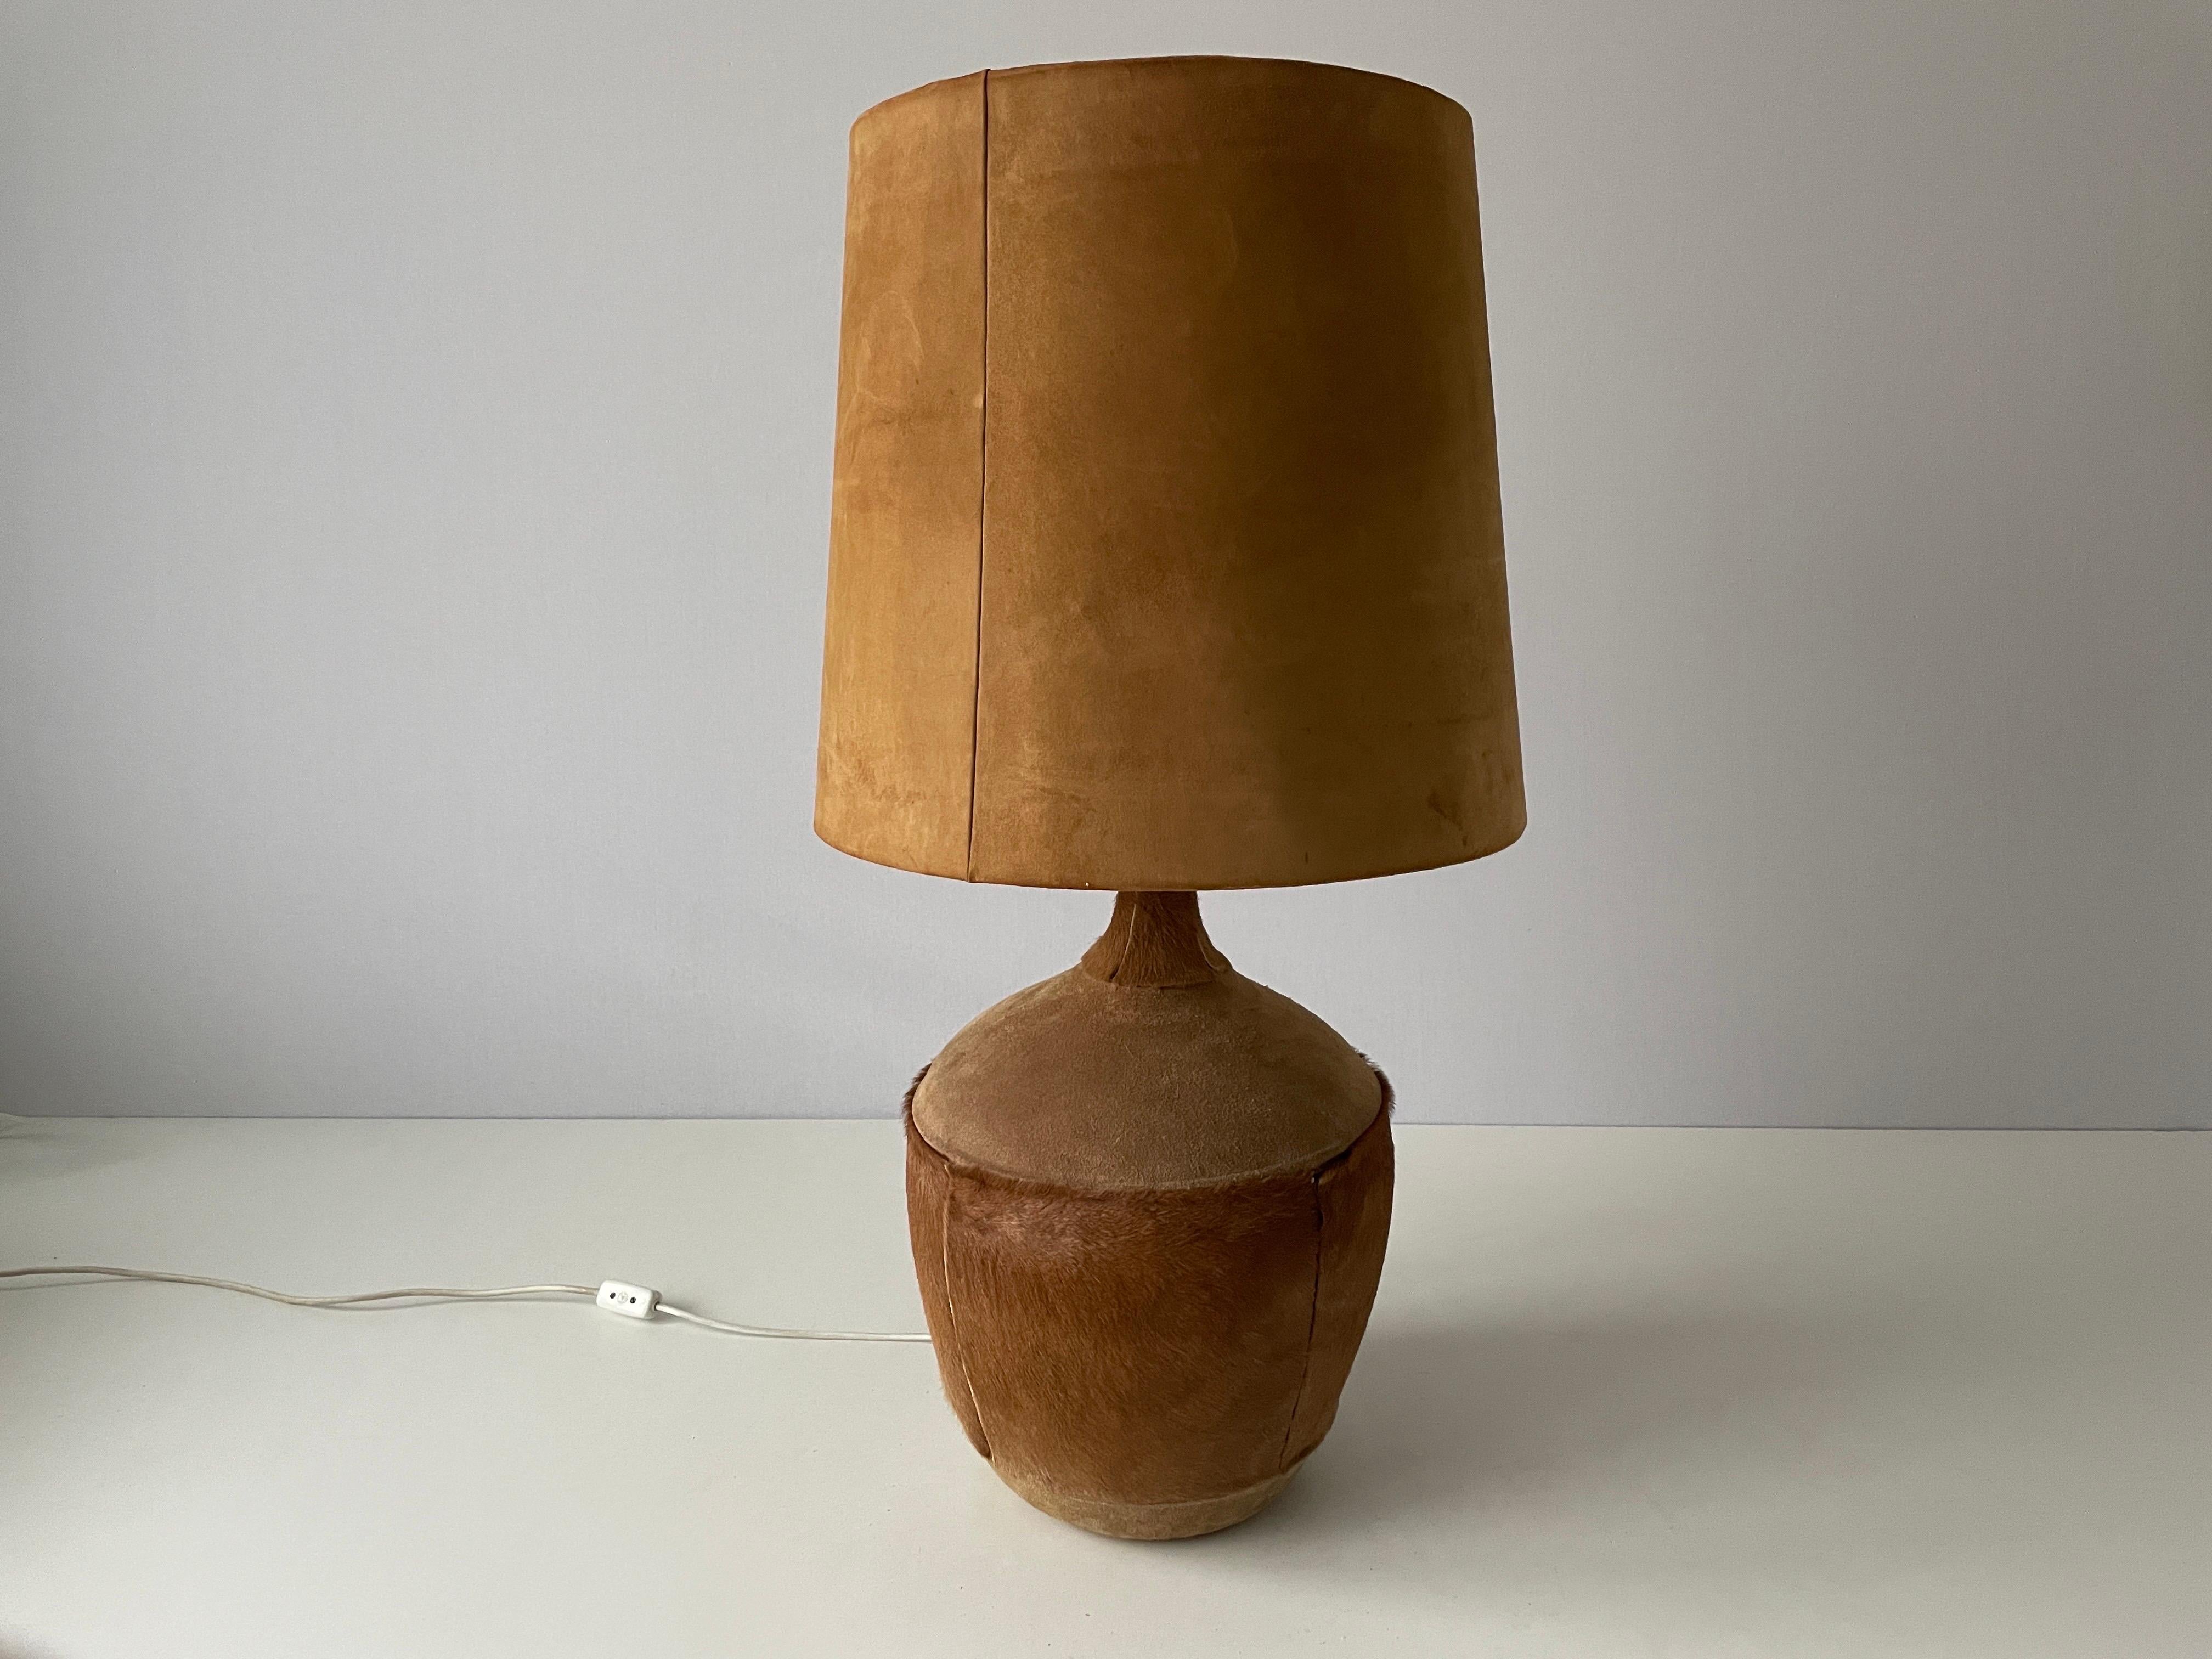 Tan Suede Leather and Glass Shade Floor or Table Lamp, 1960s, Denmark

Lampshade is in very good vintage condition.

It has European plug. It can be converted to other countries plugs with using converter. Also it can be rewired different type of